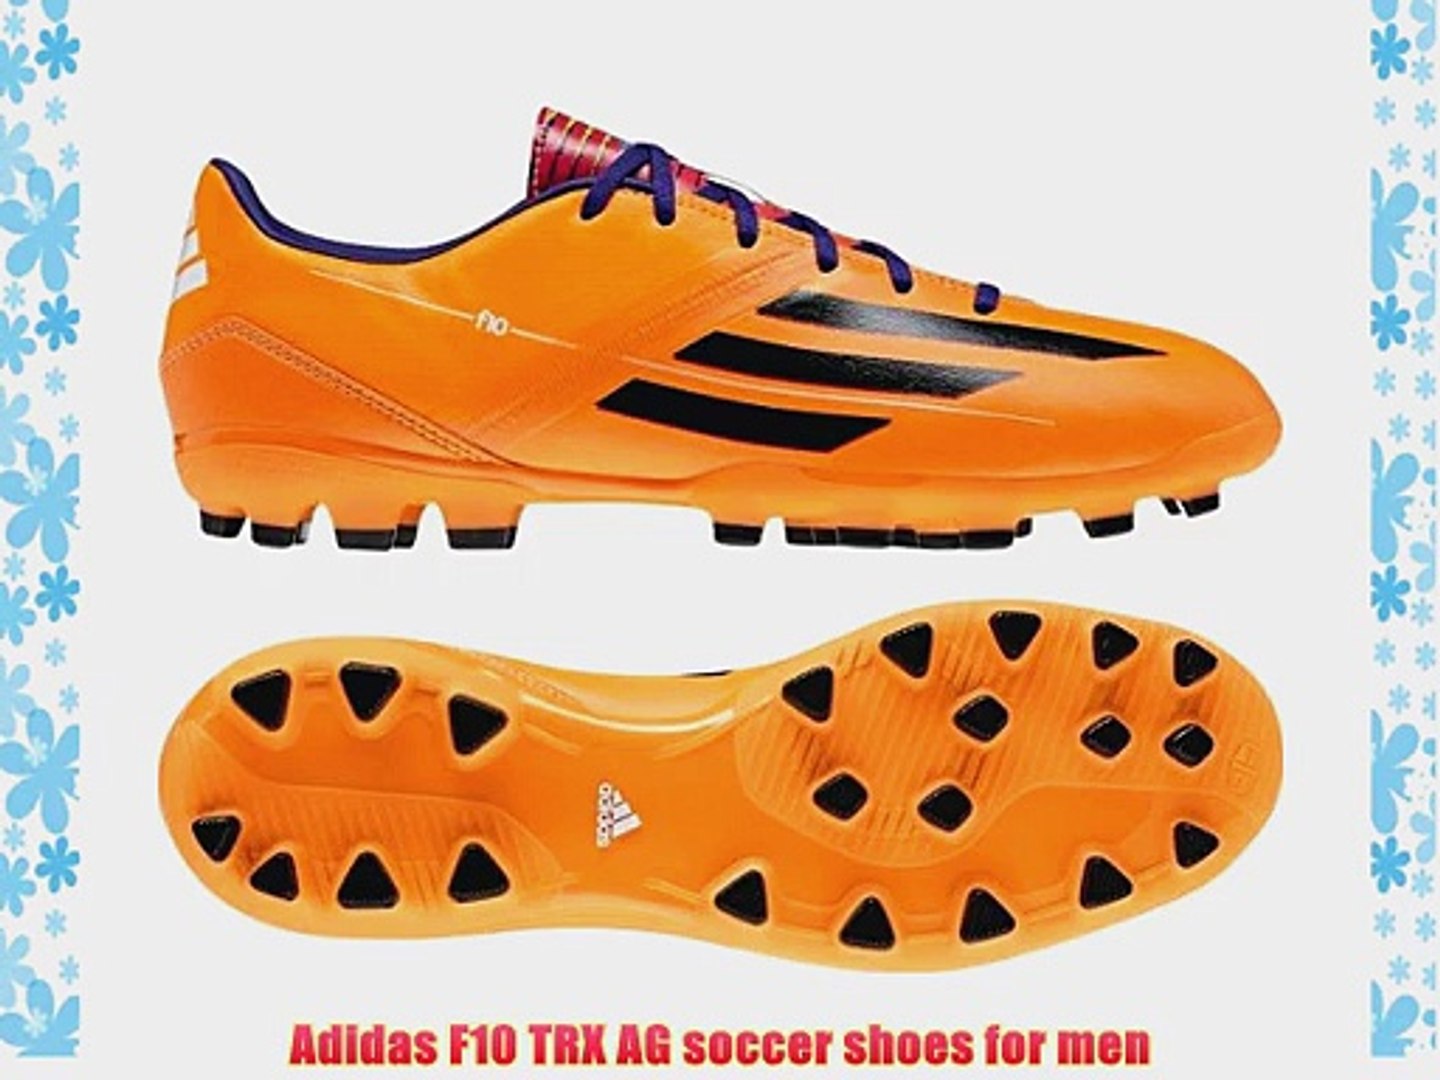 Adidas F10 TRX AG soccer shoes for men - video Dailymotion